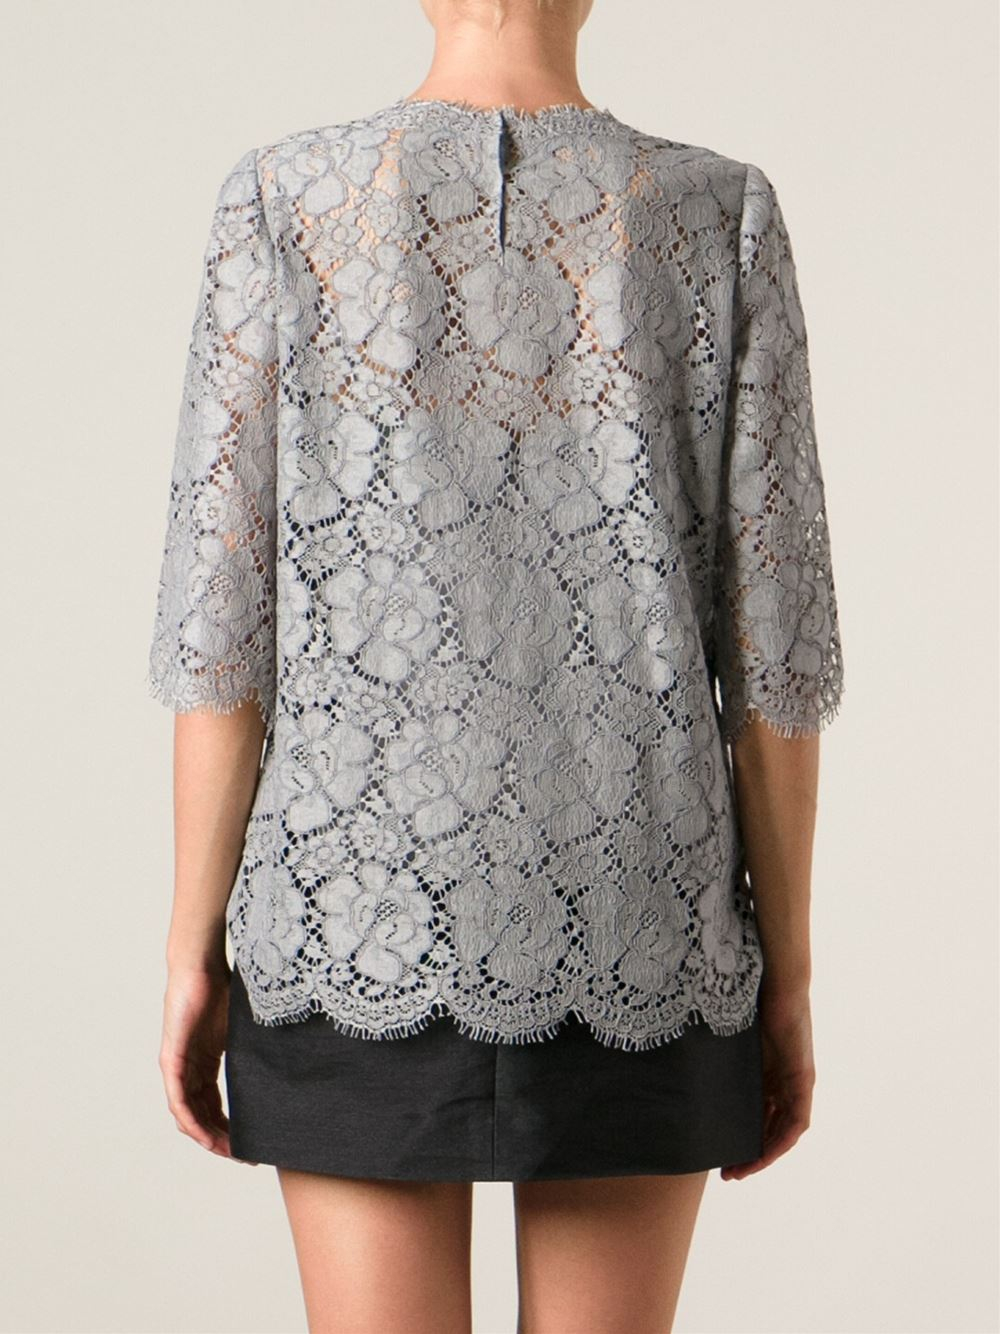 Dolce ☀ Gabbana Floral Lace Top in Grey ...